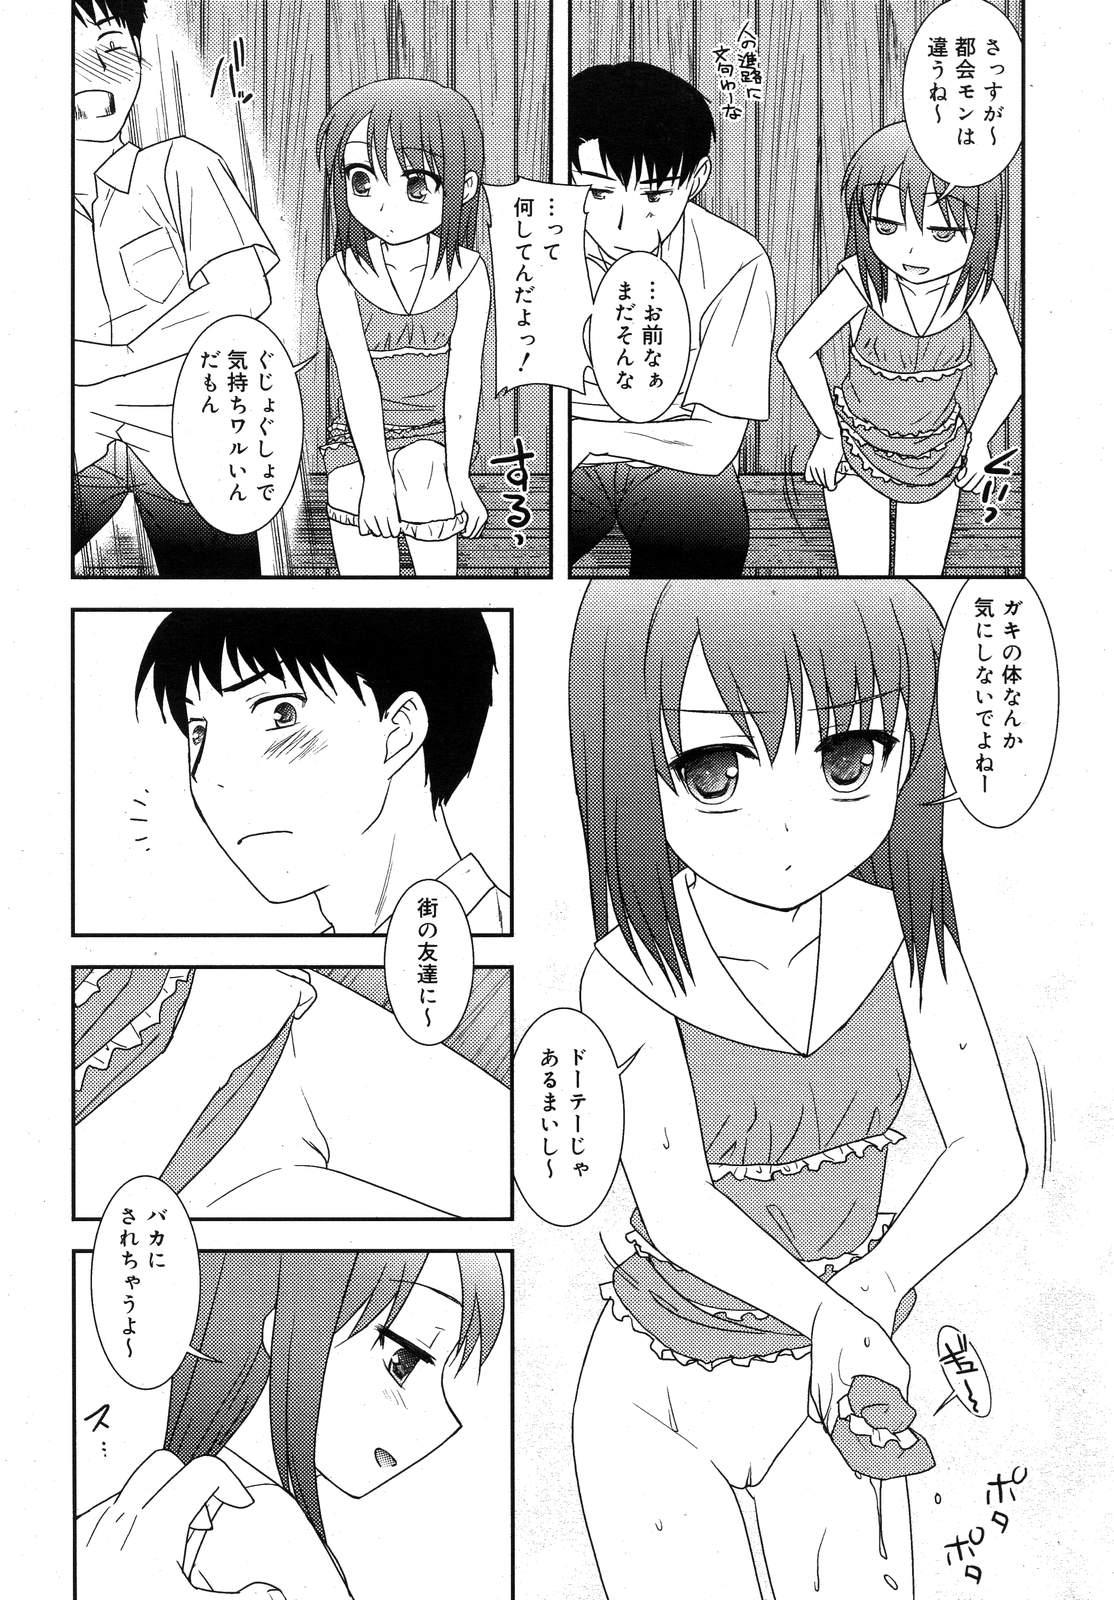 Stripping COMIC RiN 2007-10 Vol. 34 Best - Page 10